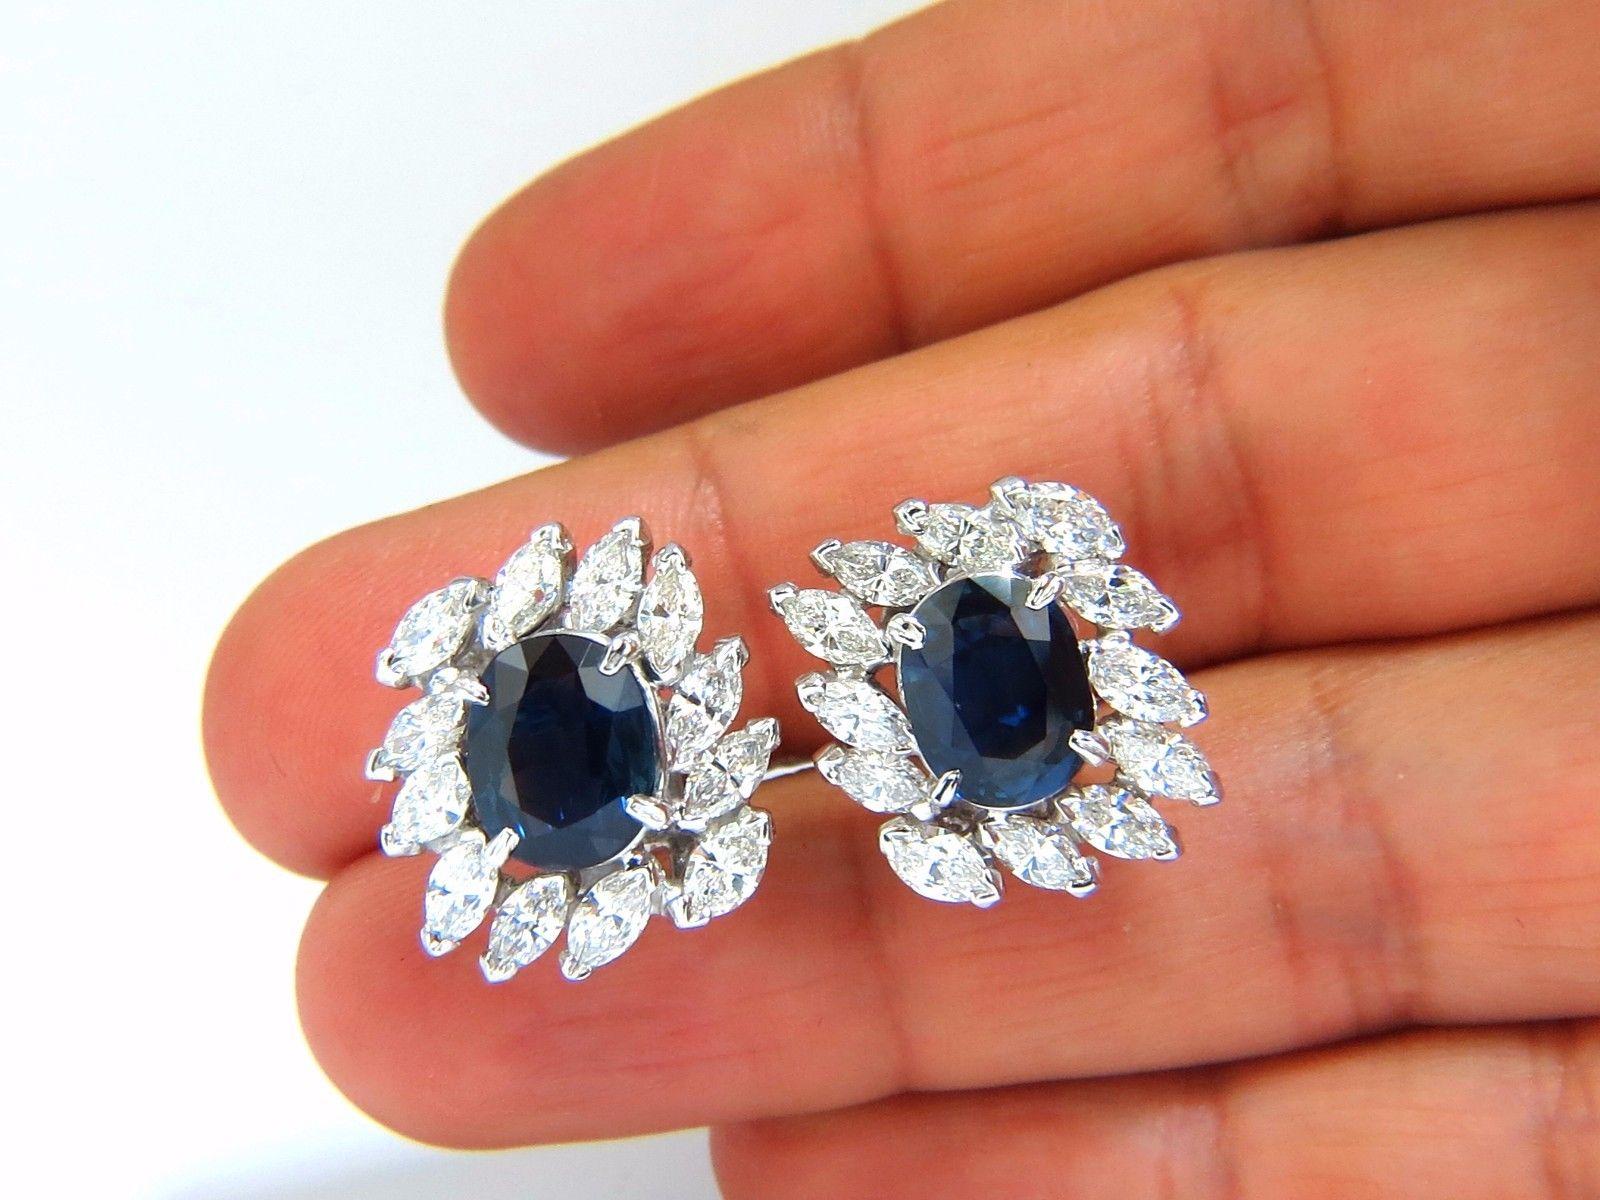 GIA Certified 3.74ct & 3.62Ct Natural Blue sapphire earrings.

Report # 2173124301

VS clean clarity / Transparent

Classic Royal Blue

10.25 X 8.15 X 4.73mm

10.30 X 8.02 X 4.32mm

3.80ct Side natural Marquise diamonds

G-color Vs-2 clarity.

Each